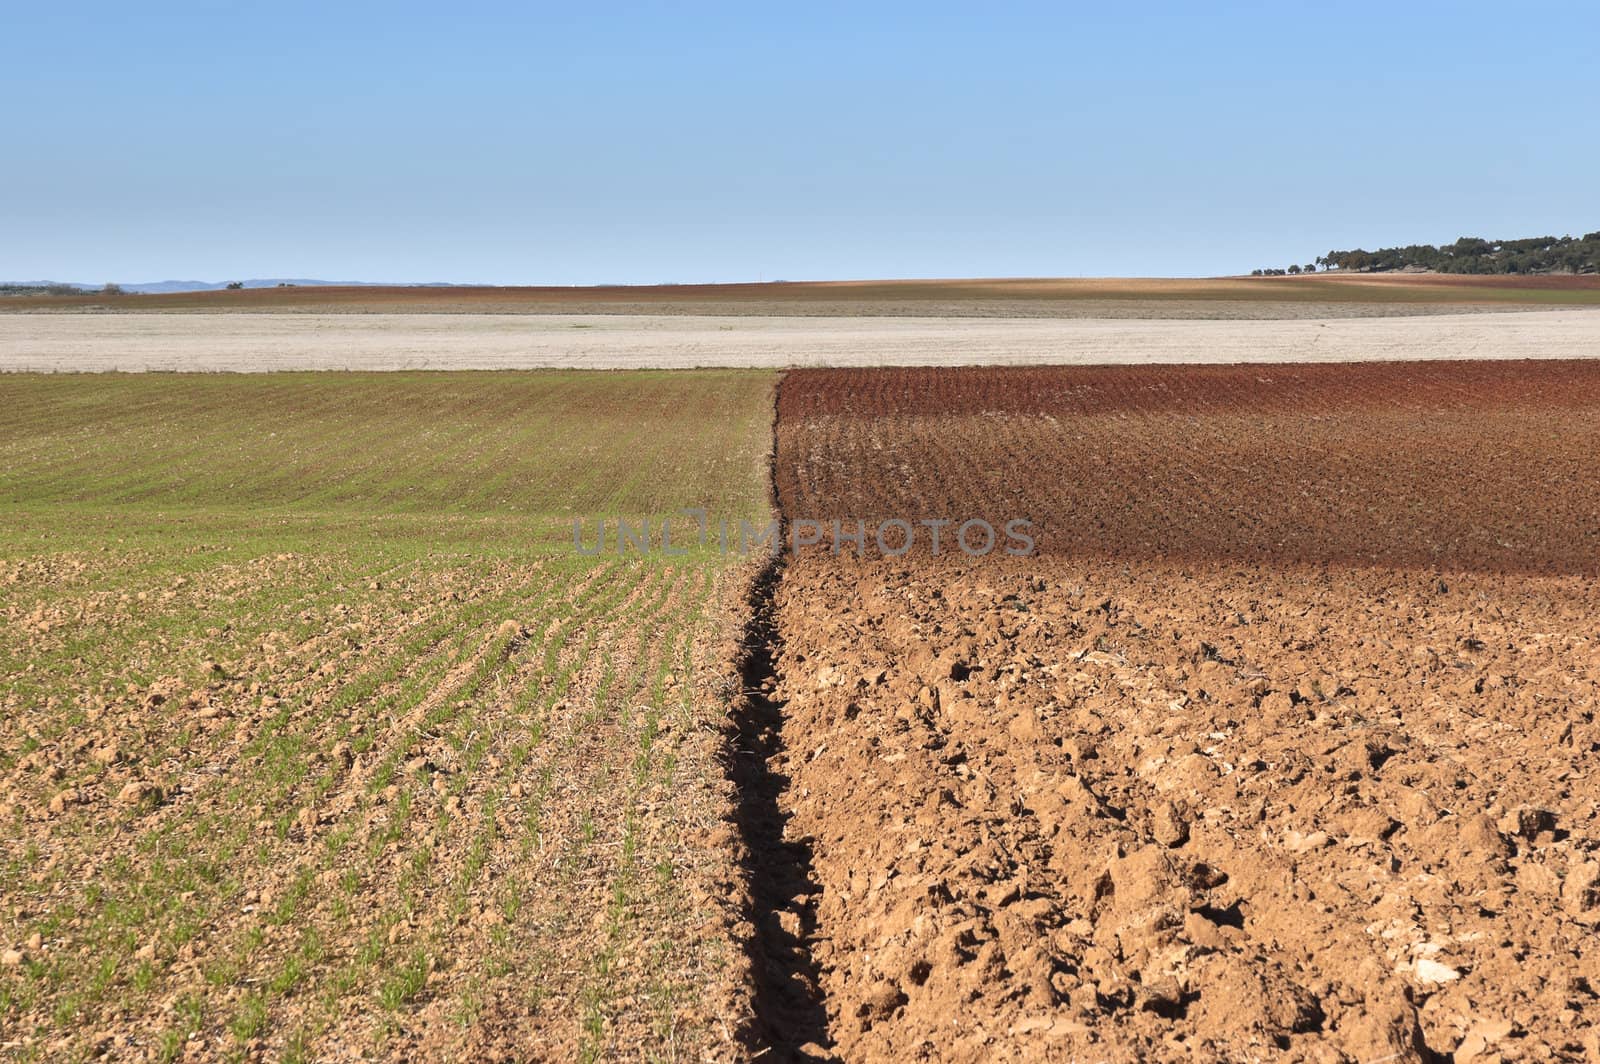  Ploughed fields in the vast plain of Alentejo, Portugal